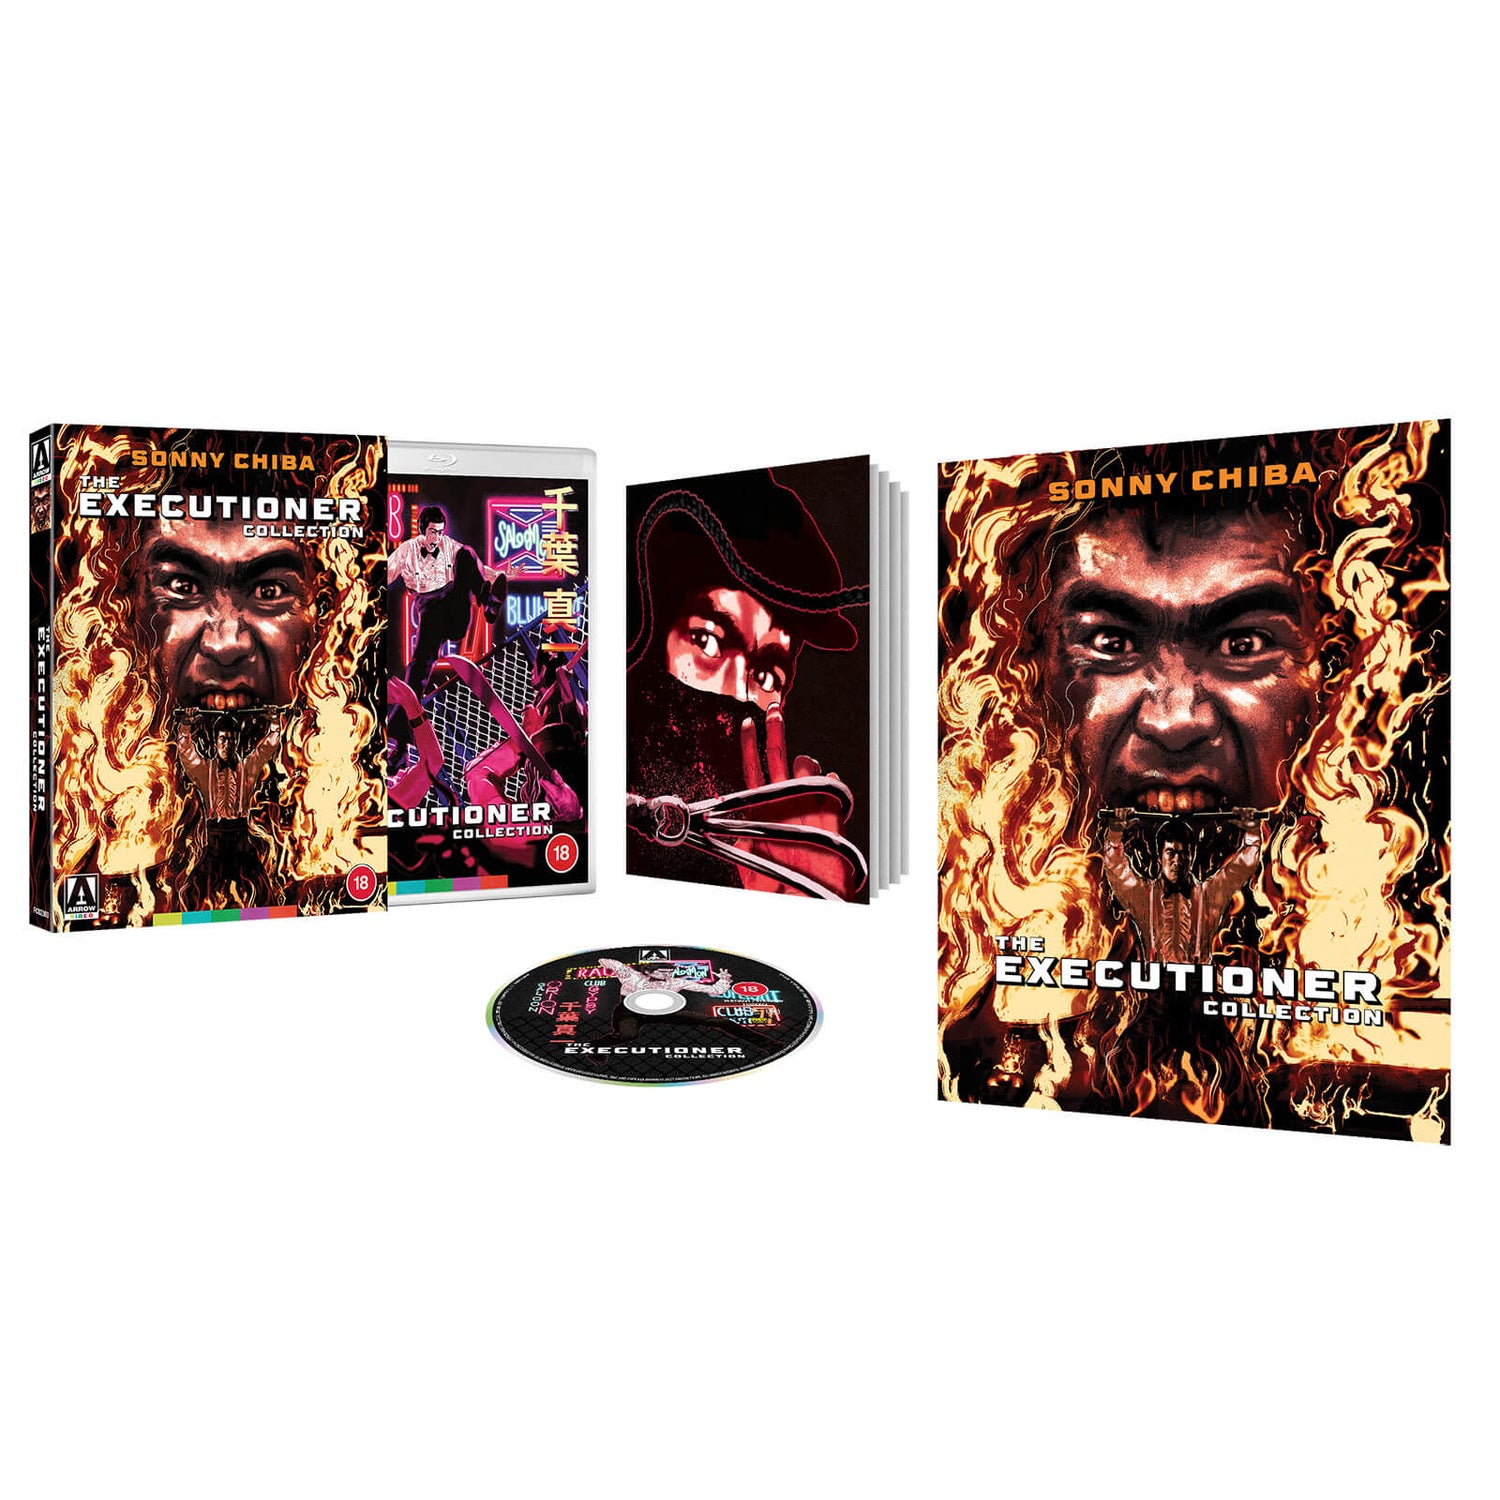 The Executioner Collection Blu-ray